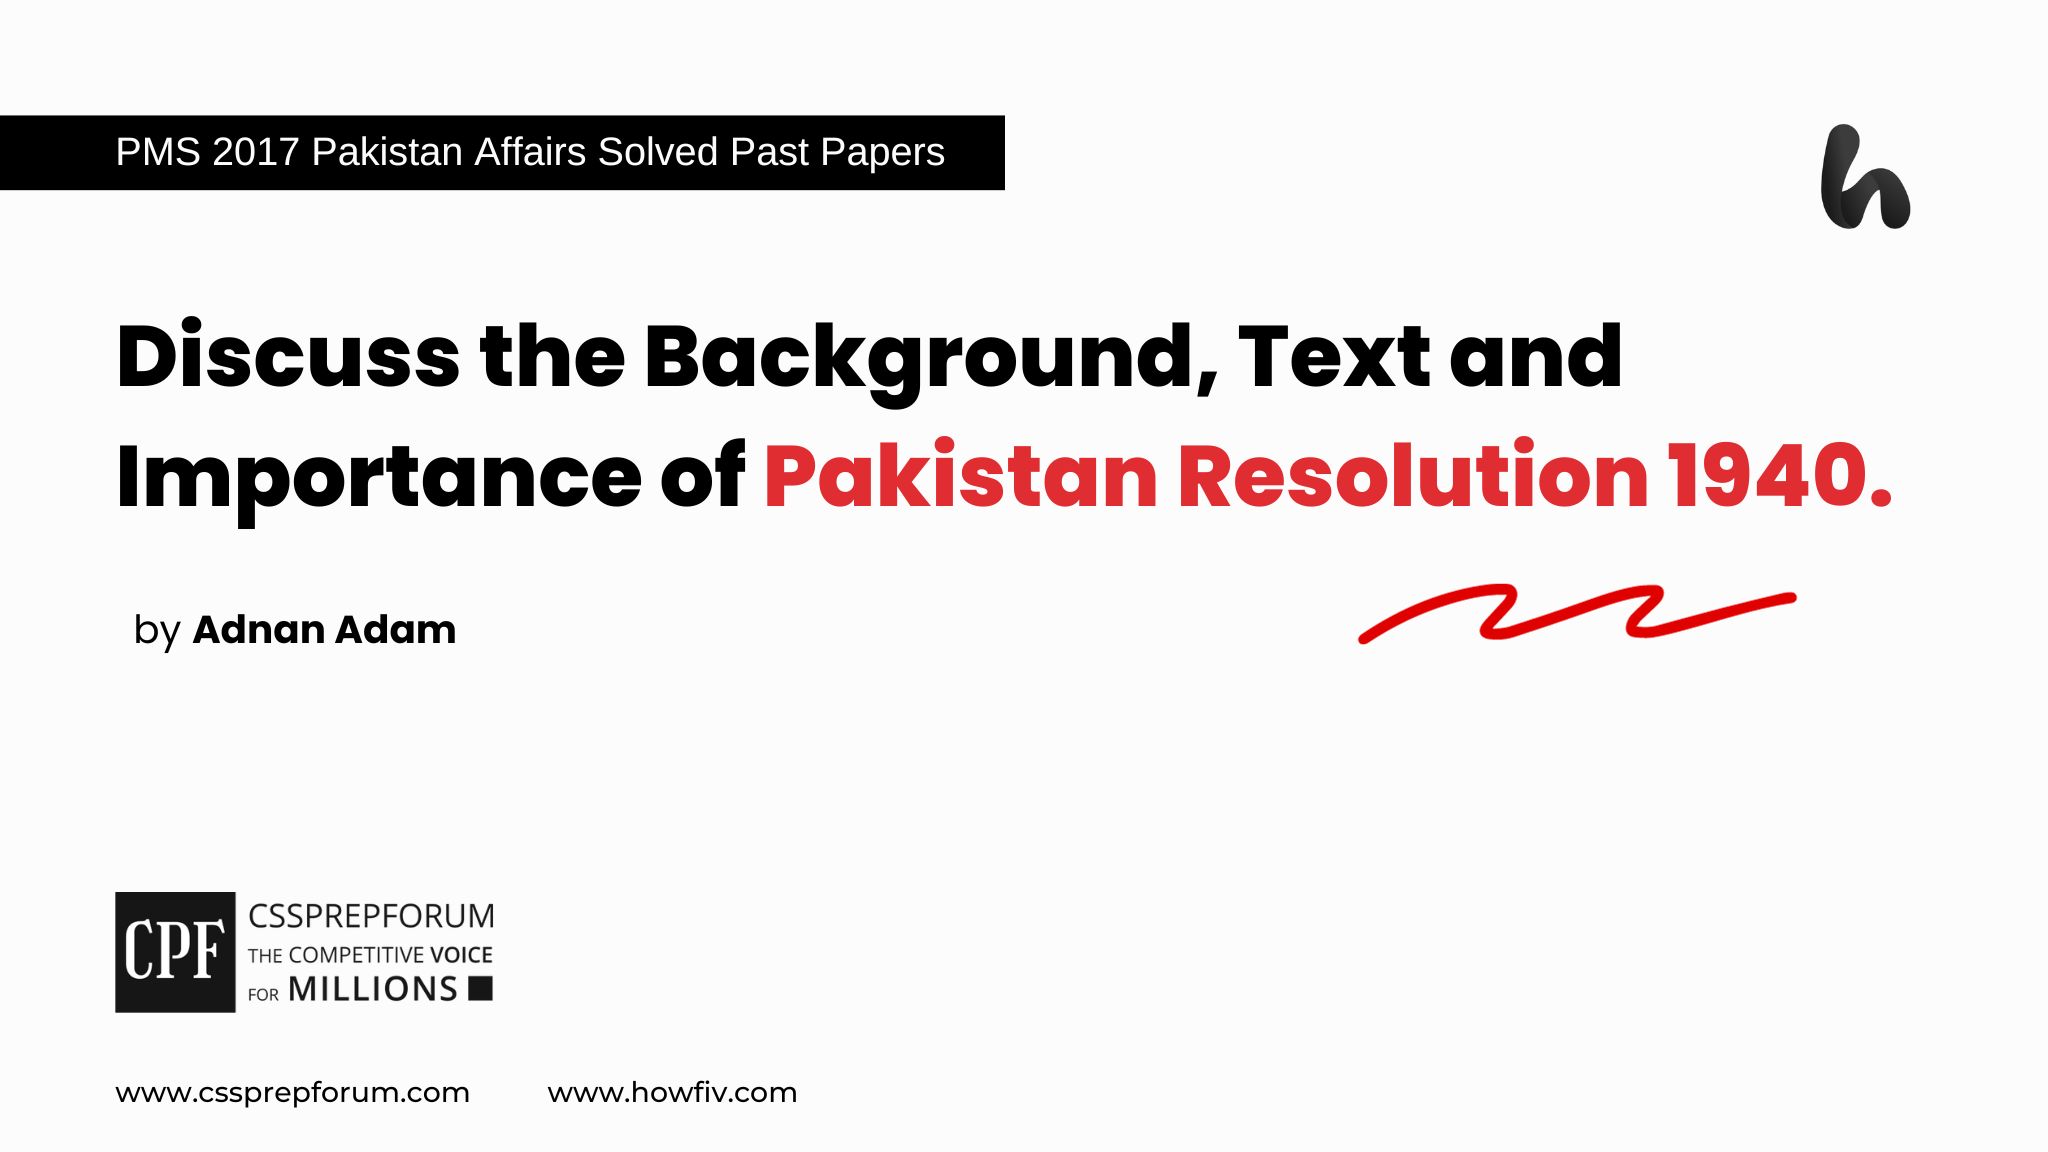 Discuss the Background, Text and Importance of Pakistan Resolution 1940.